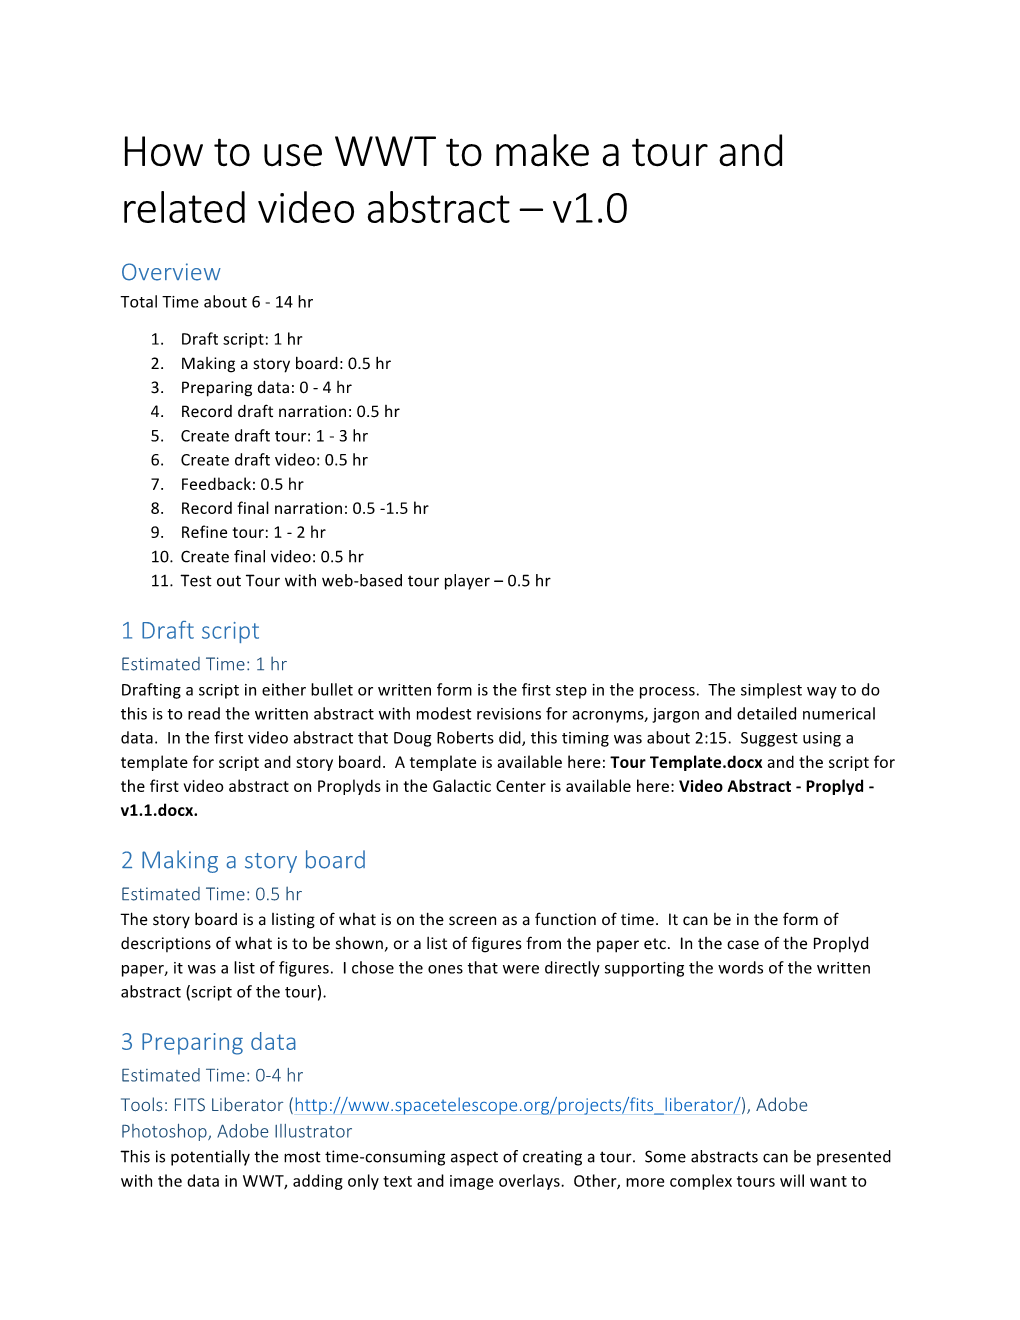 Using WWT to Make Video Abstracts.Docx